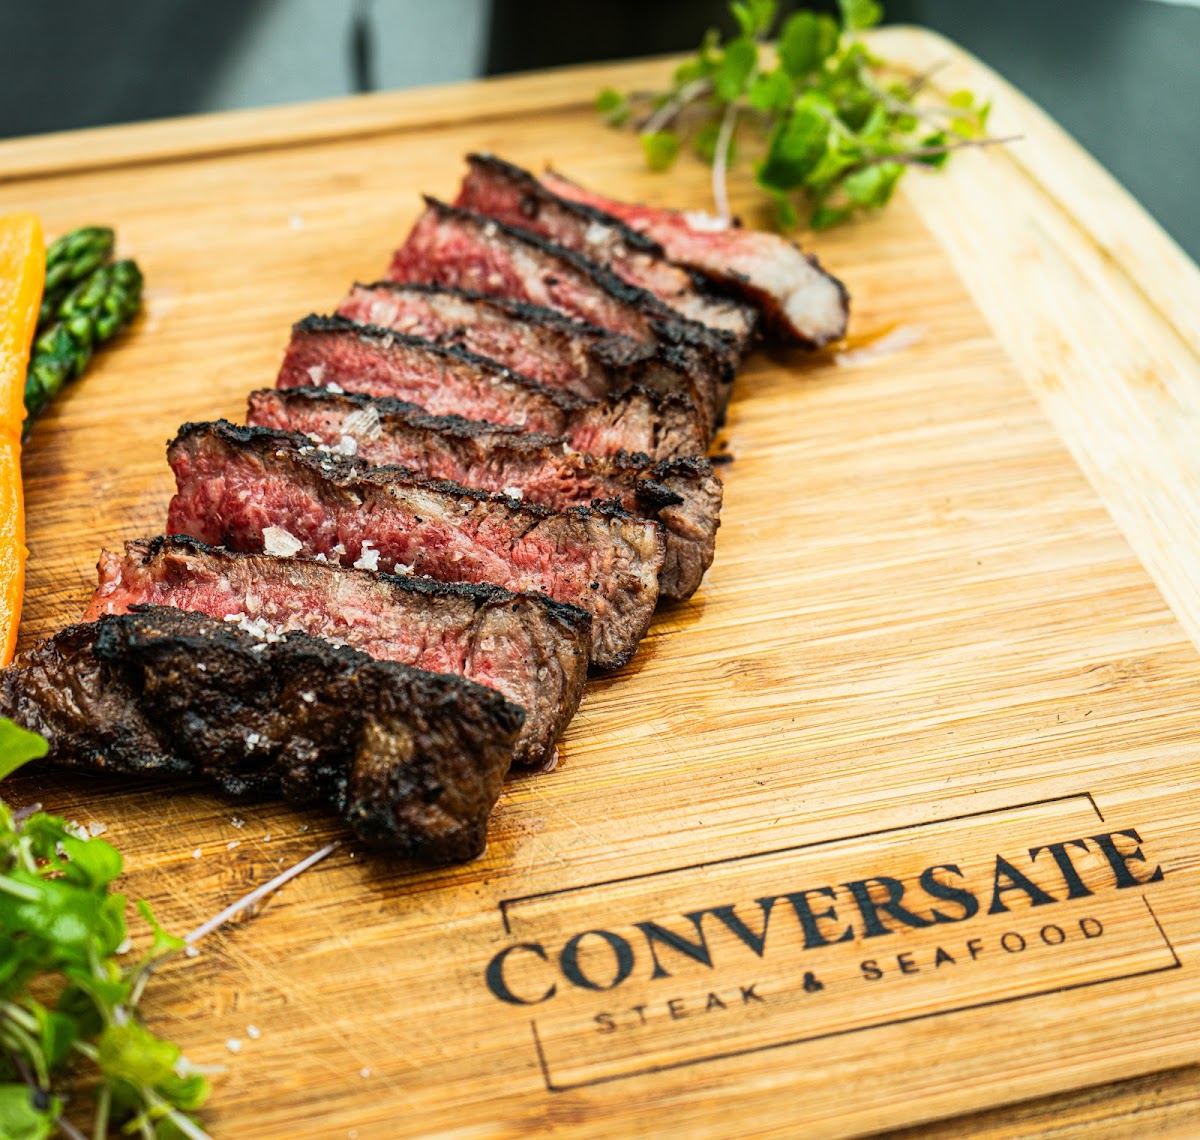 Gluten-Free at Conversate Steak and Seafood